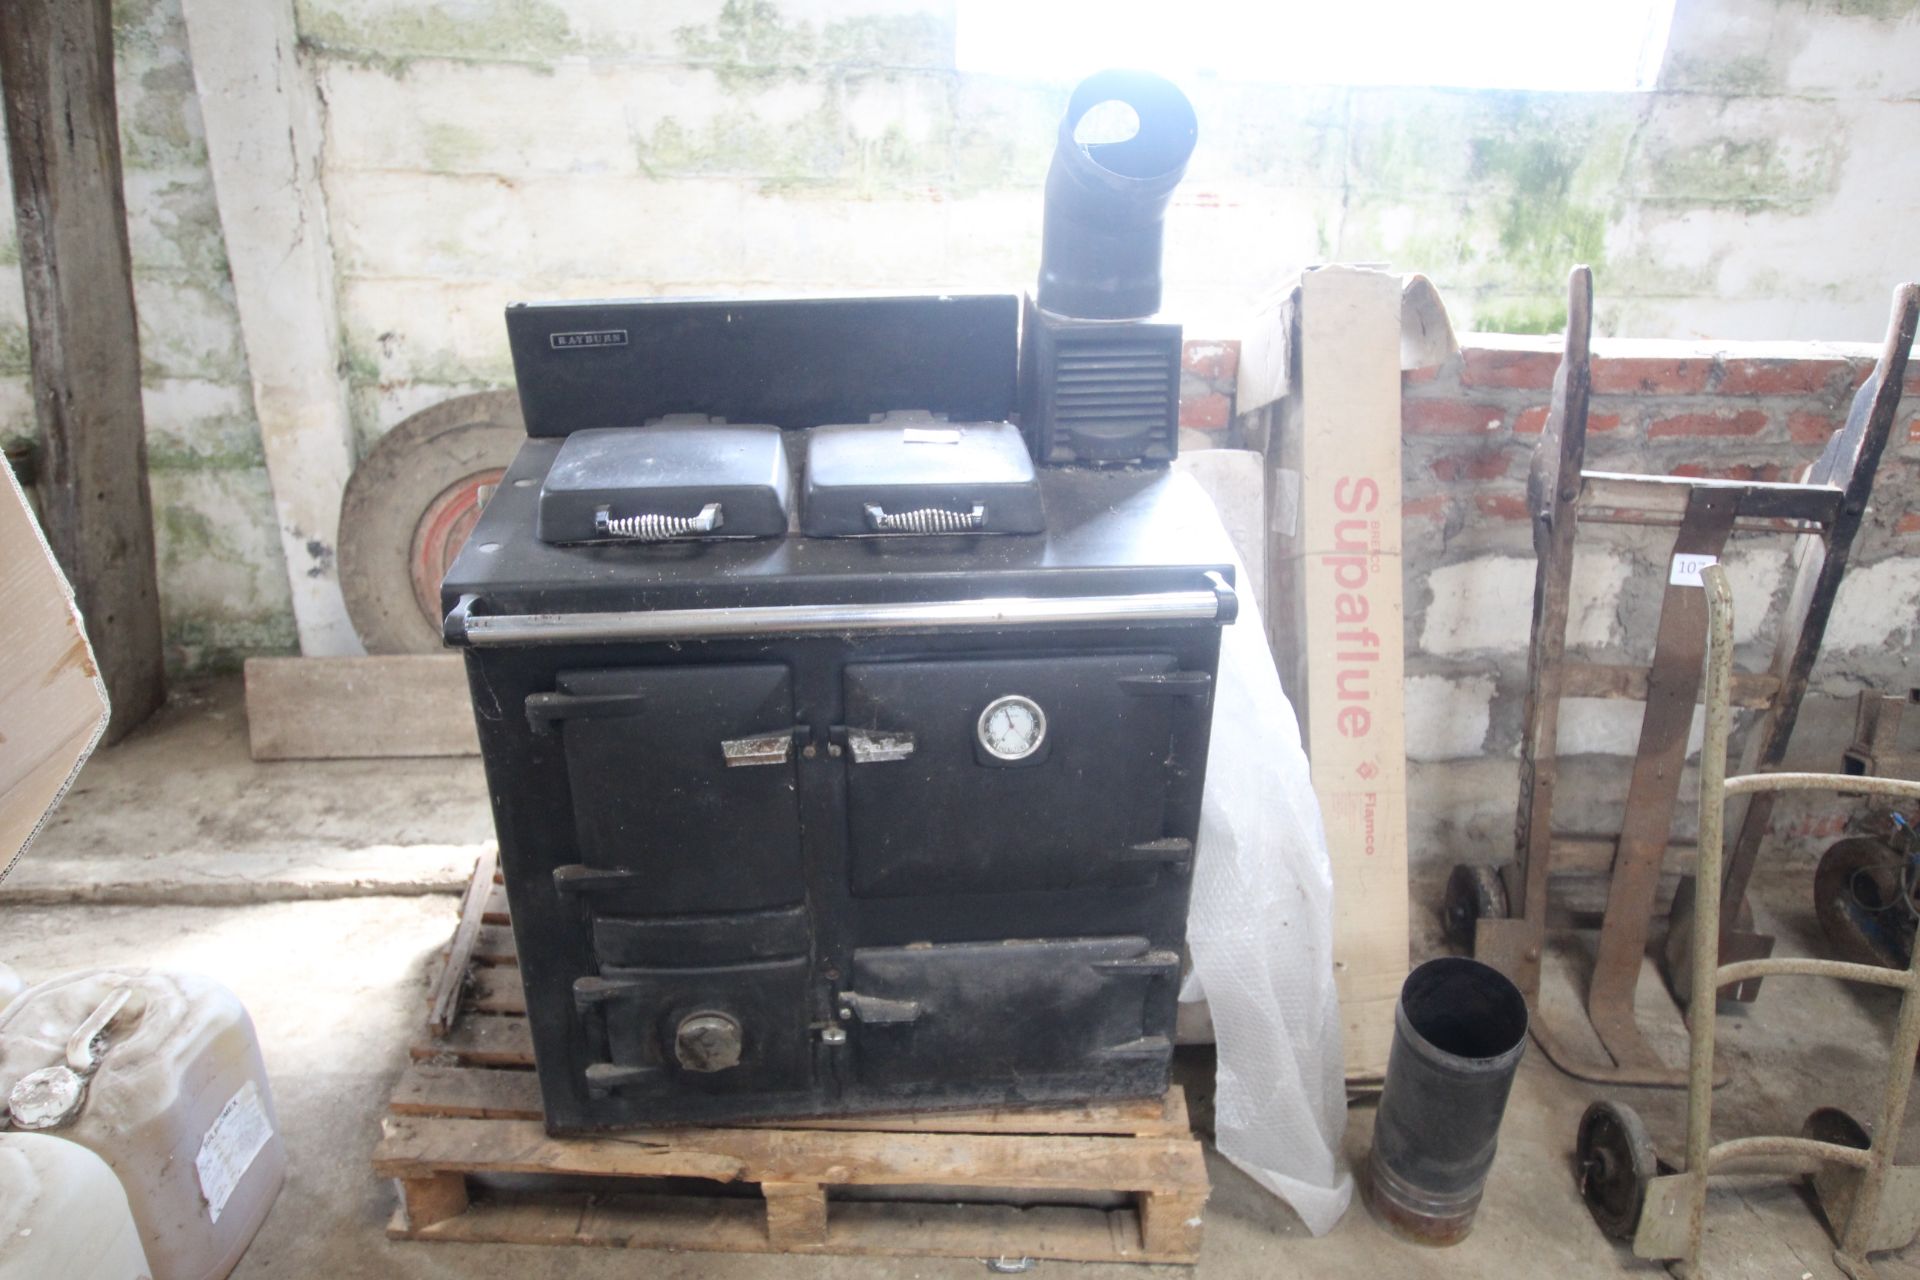 Solid fuel Rayburn and various flue parts.